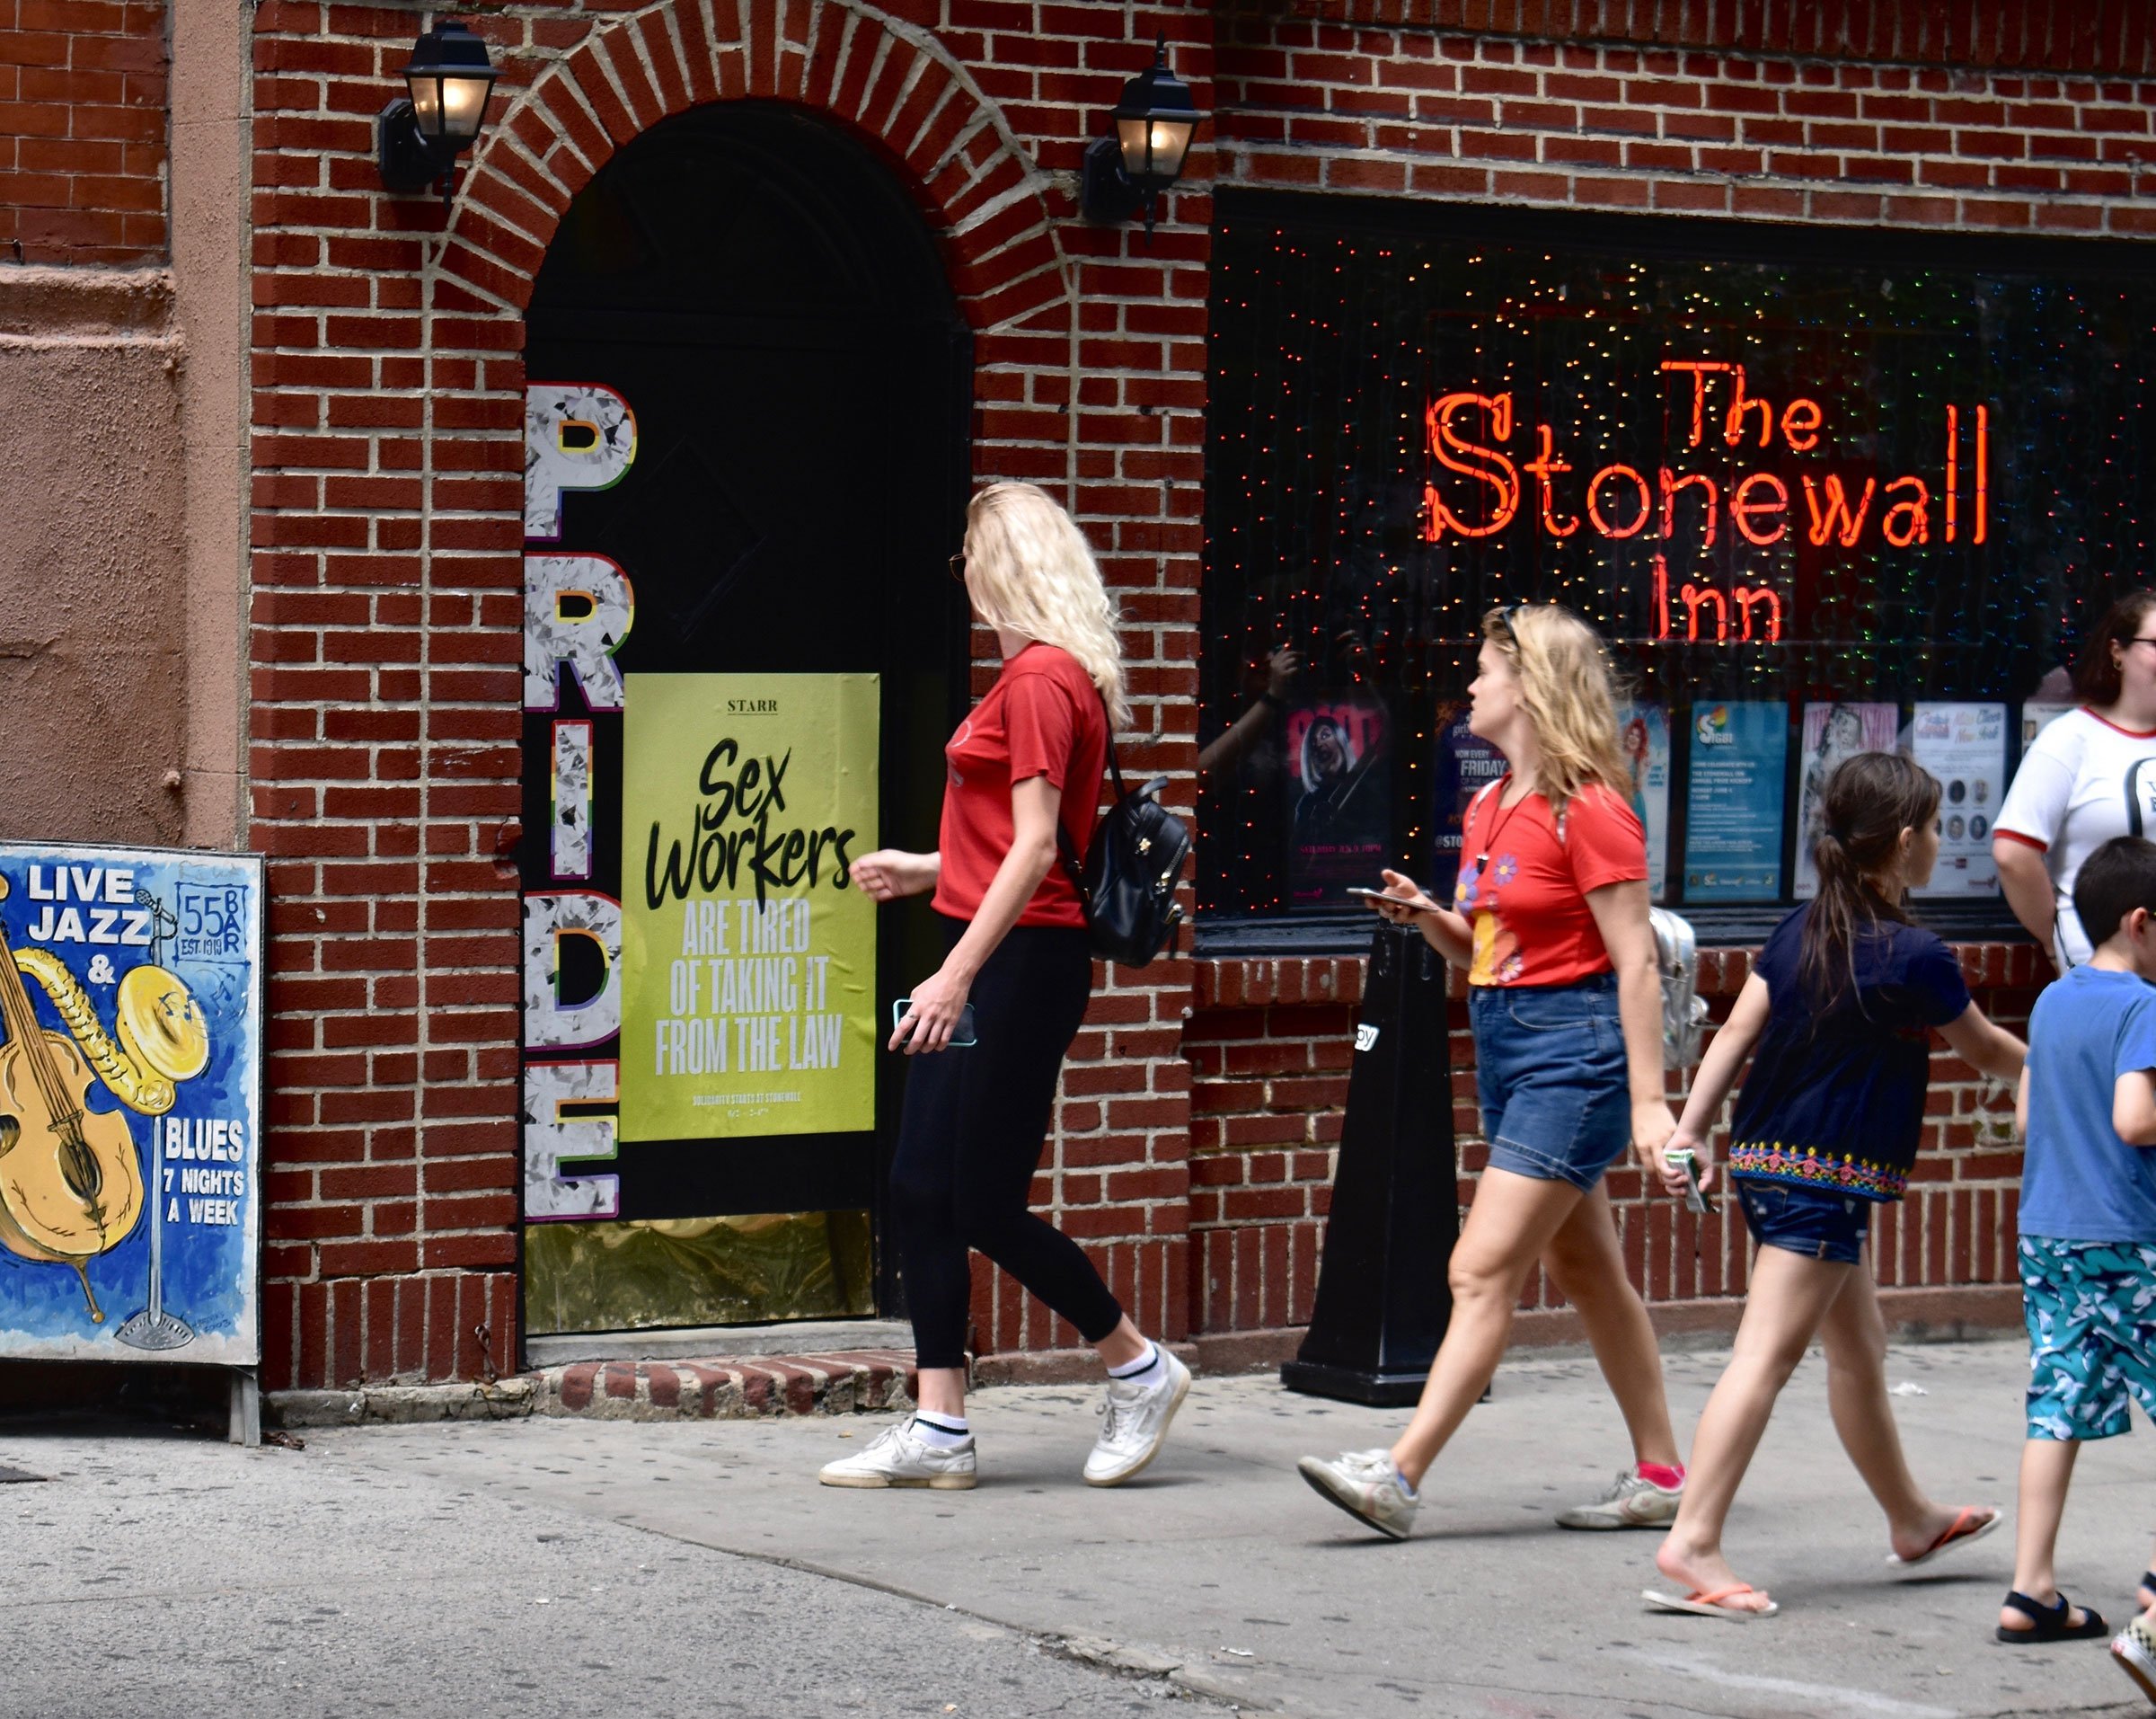 Pedestrians walk by a poster supporting sex workers displayed at The Stonewall Inn.